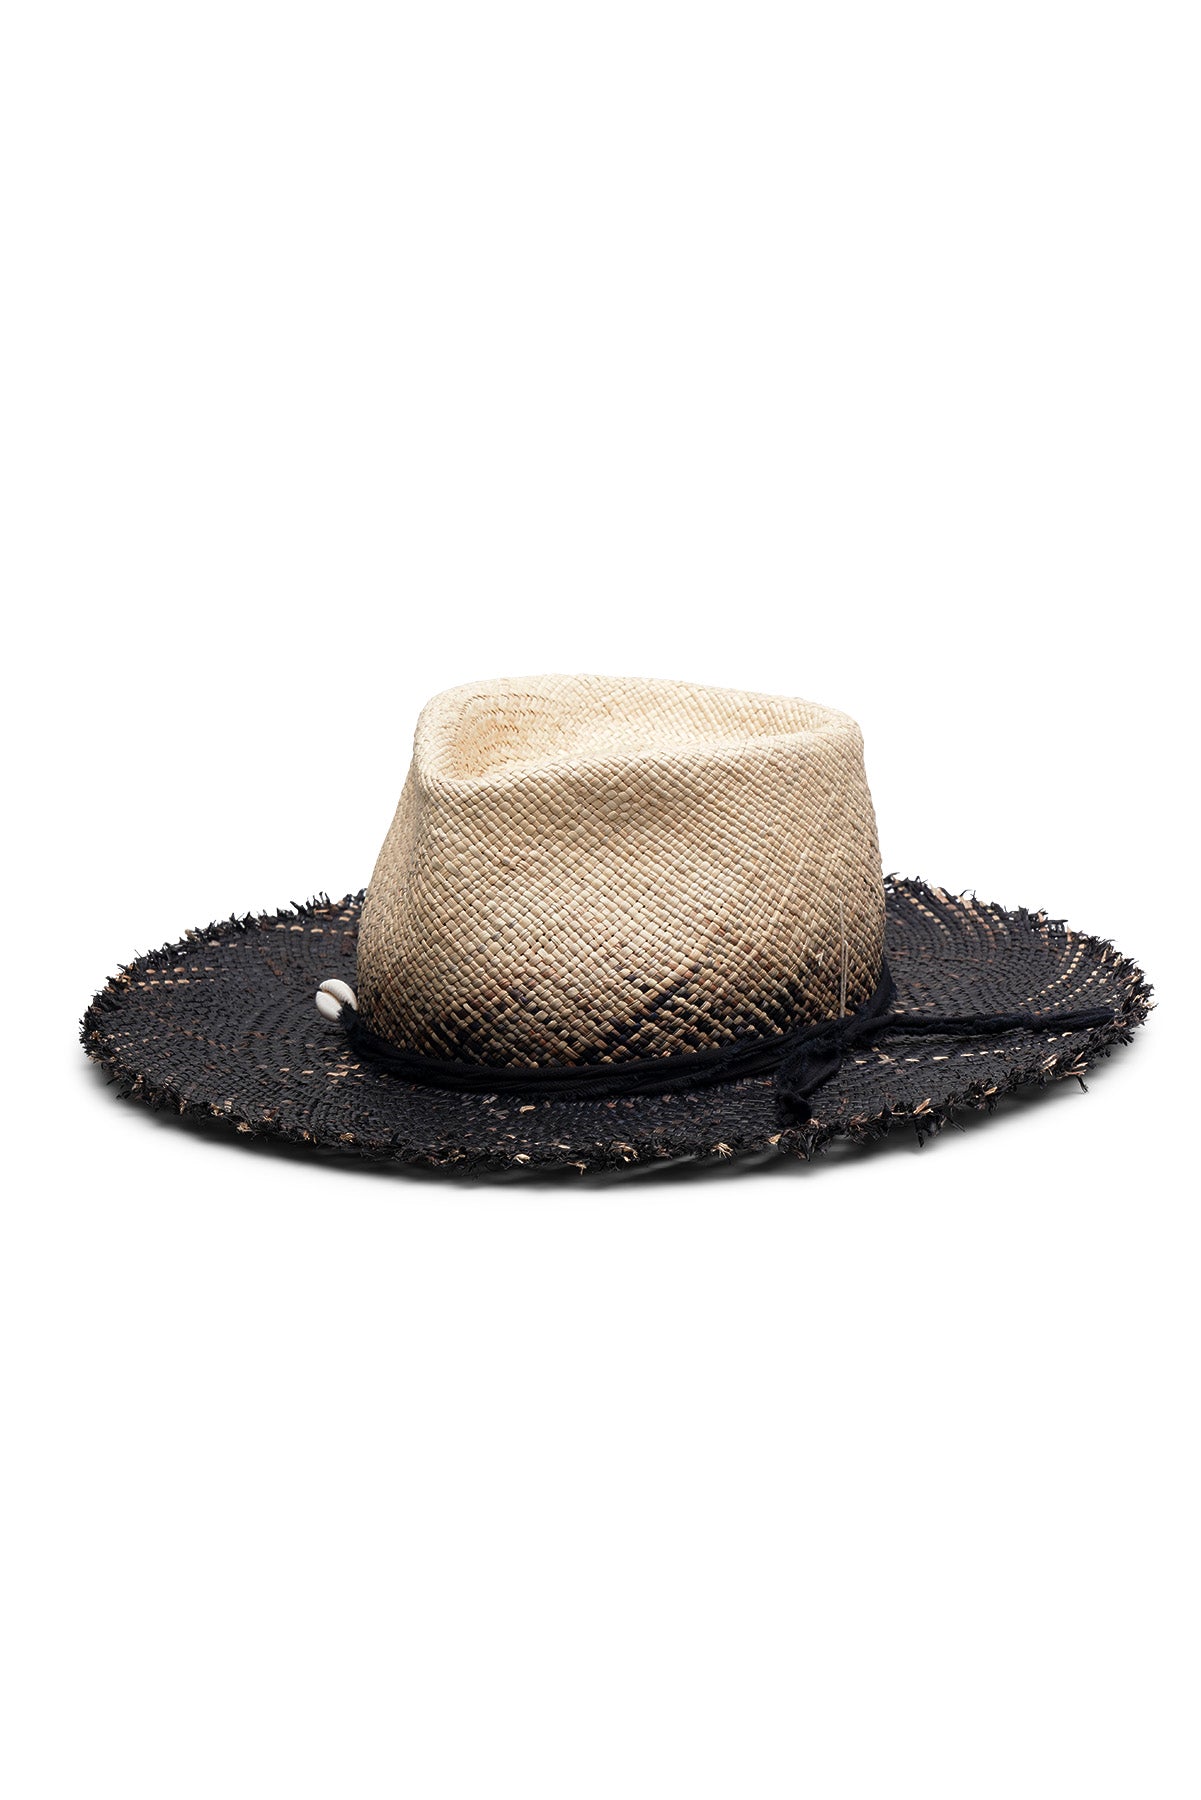 Black and natural gradient straw fedora style hat with a wide brim, frayed edges and teardrop crease. Tied cotton band with seashell detail. Unisex hat style in various sizes and colors. We ship worldwide. Shop now. Each SoonNoon hat is handmade with unique character in Stockholm, Sweden. 